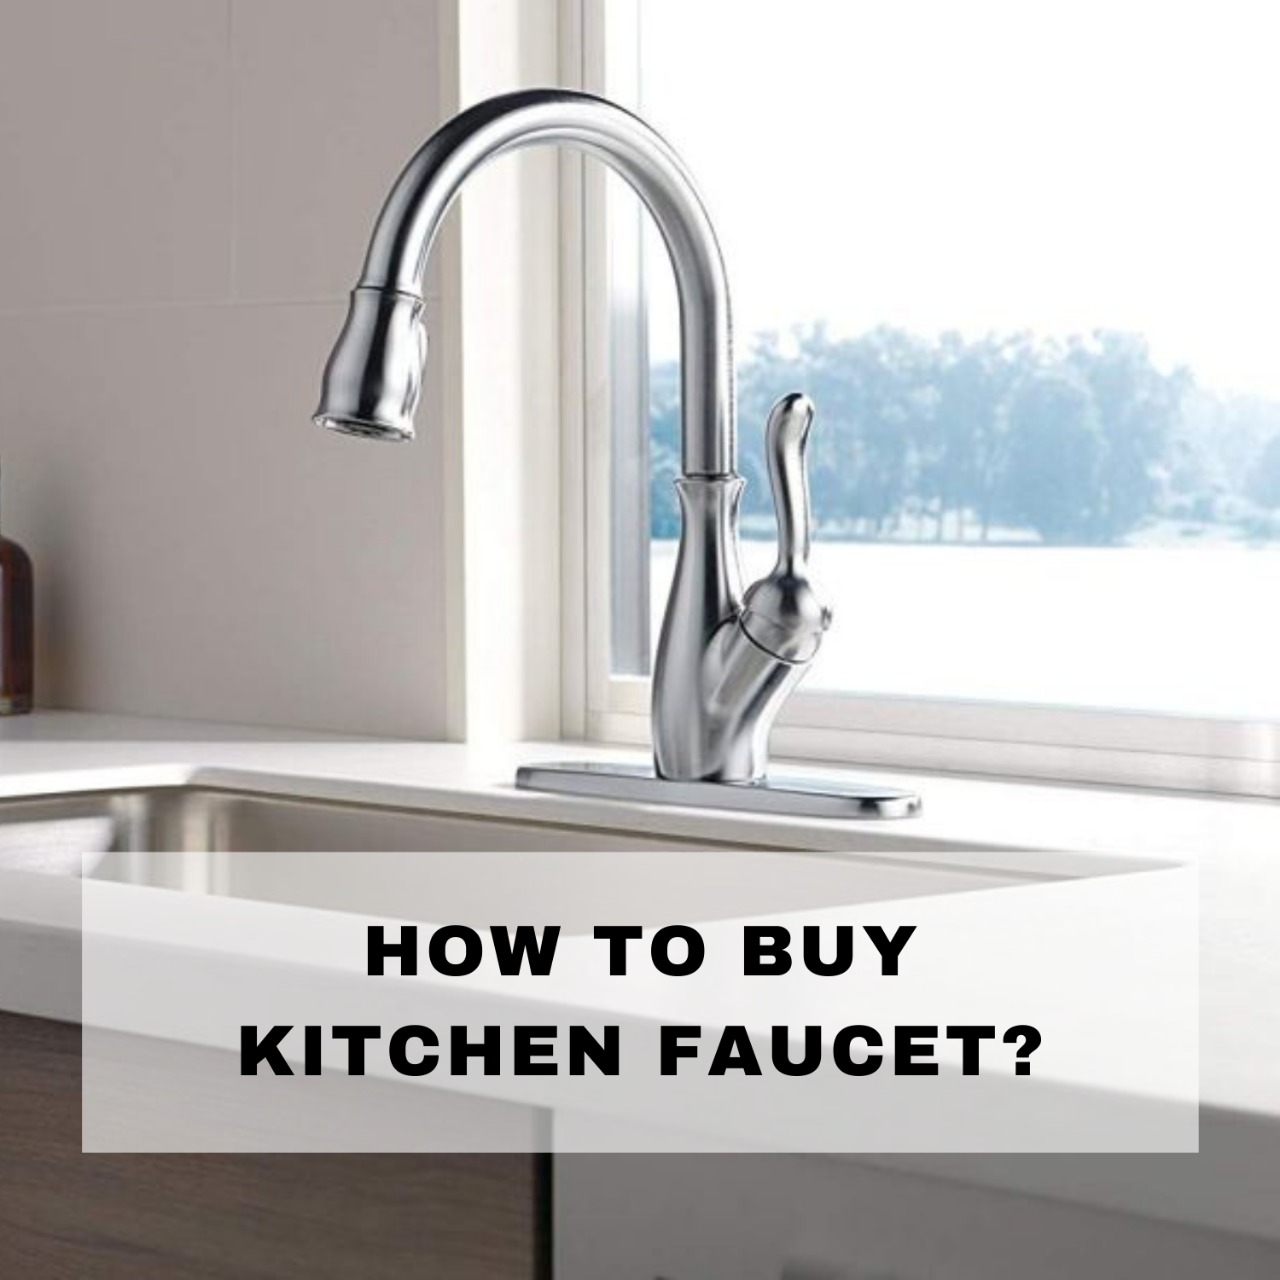 How to Buy A Kitchen Faucet?